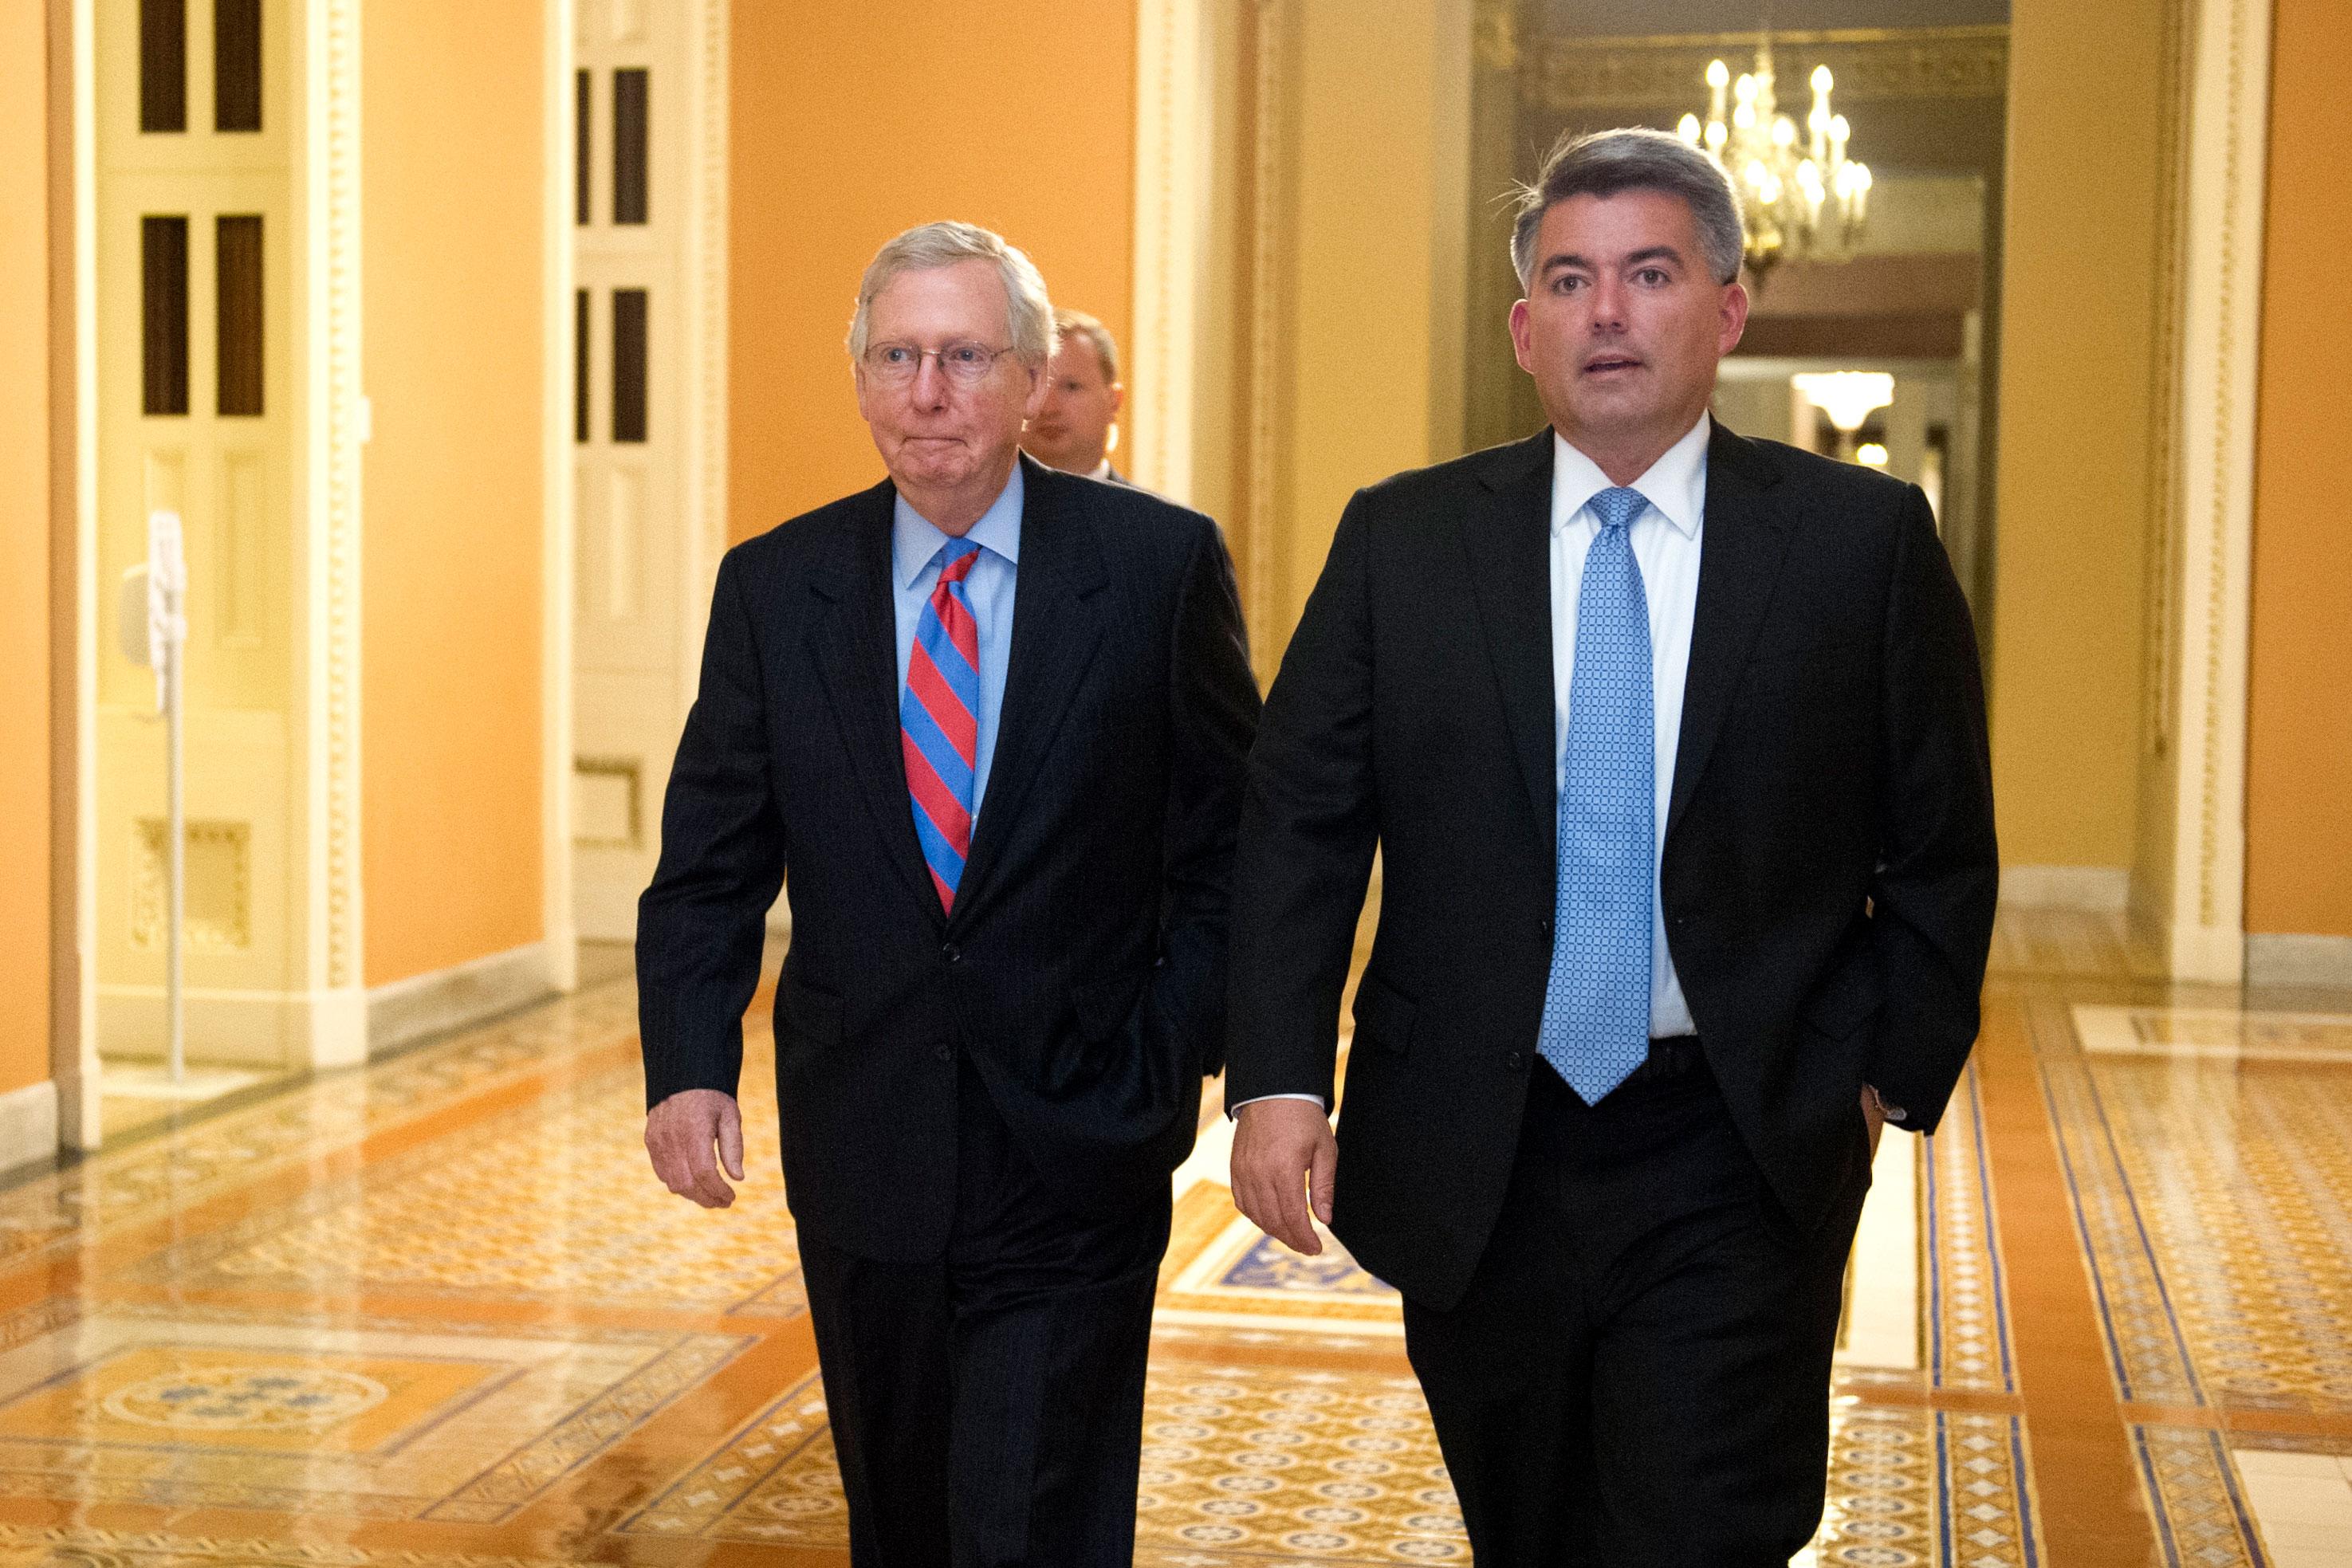 Photo: Senate Health Care Votes | Mitch McConnell And Cory Gardner - AP